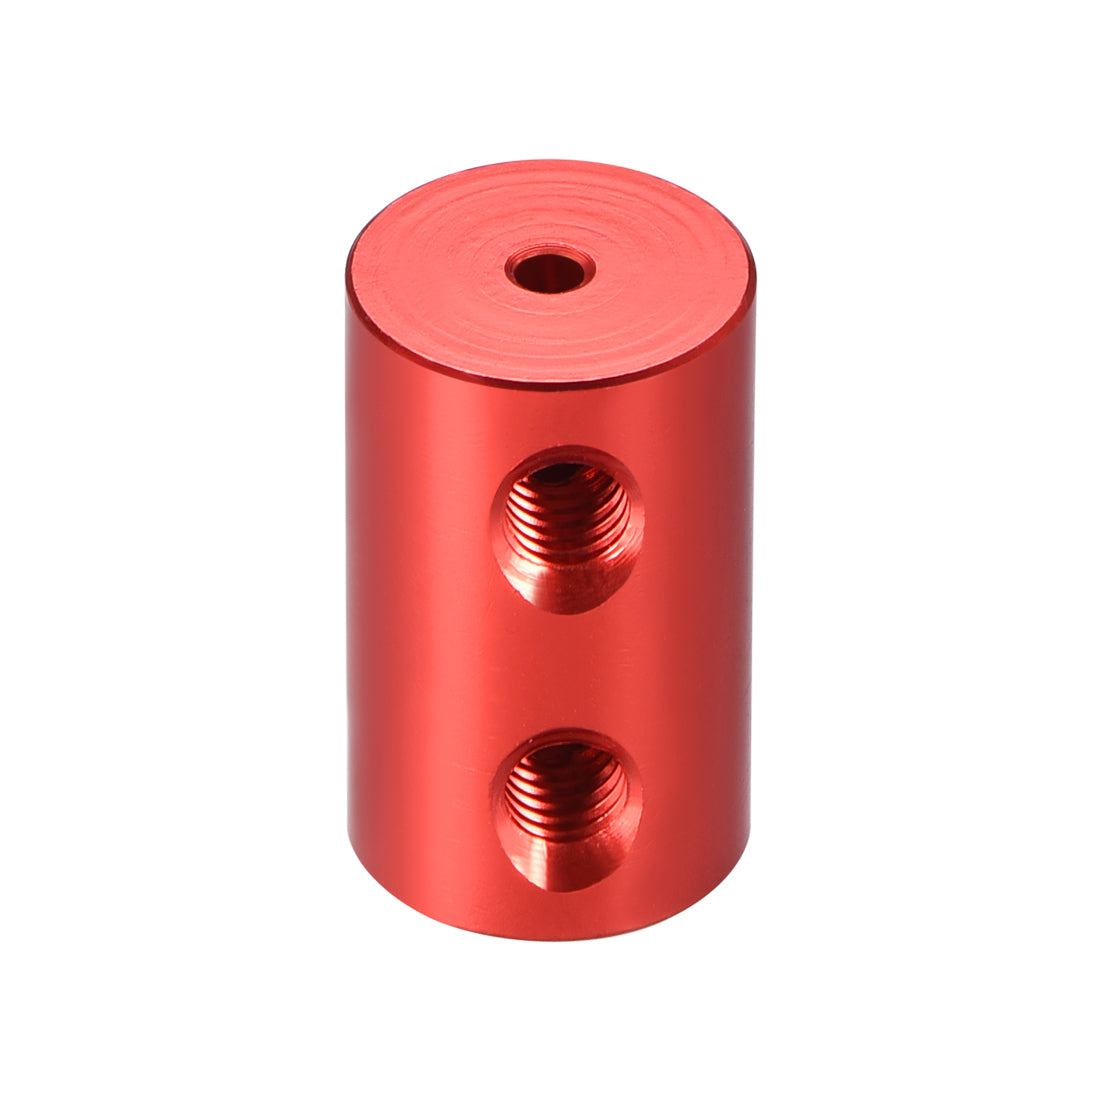 uxcell Uxcell Shaft Coupling 2mm to 3mm Bore L20xD12 Robot Motor Wheel Rigid Coupler Connector Red